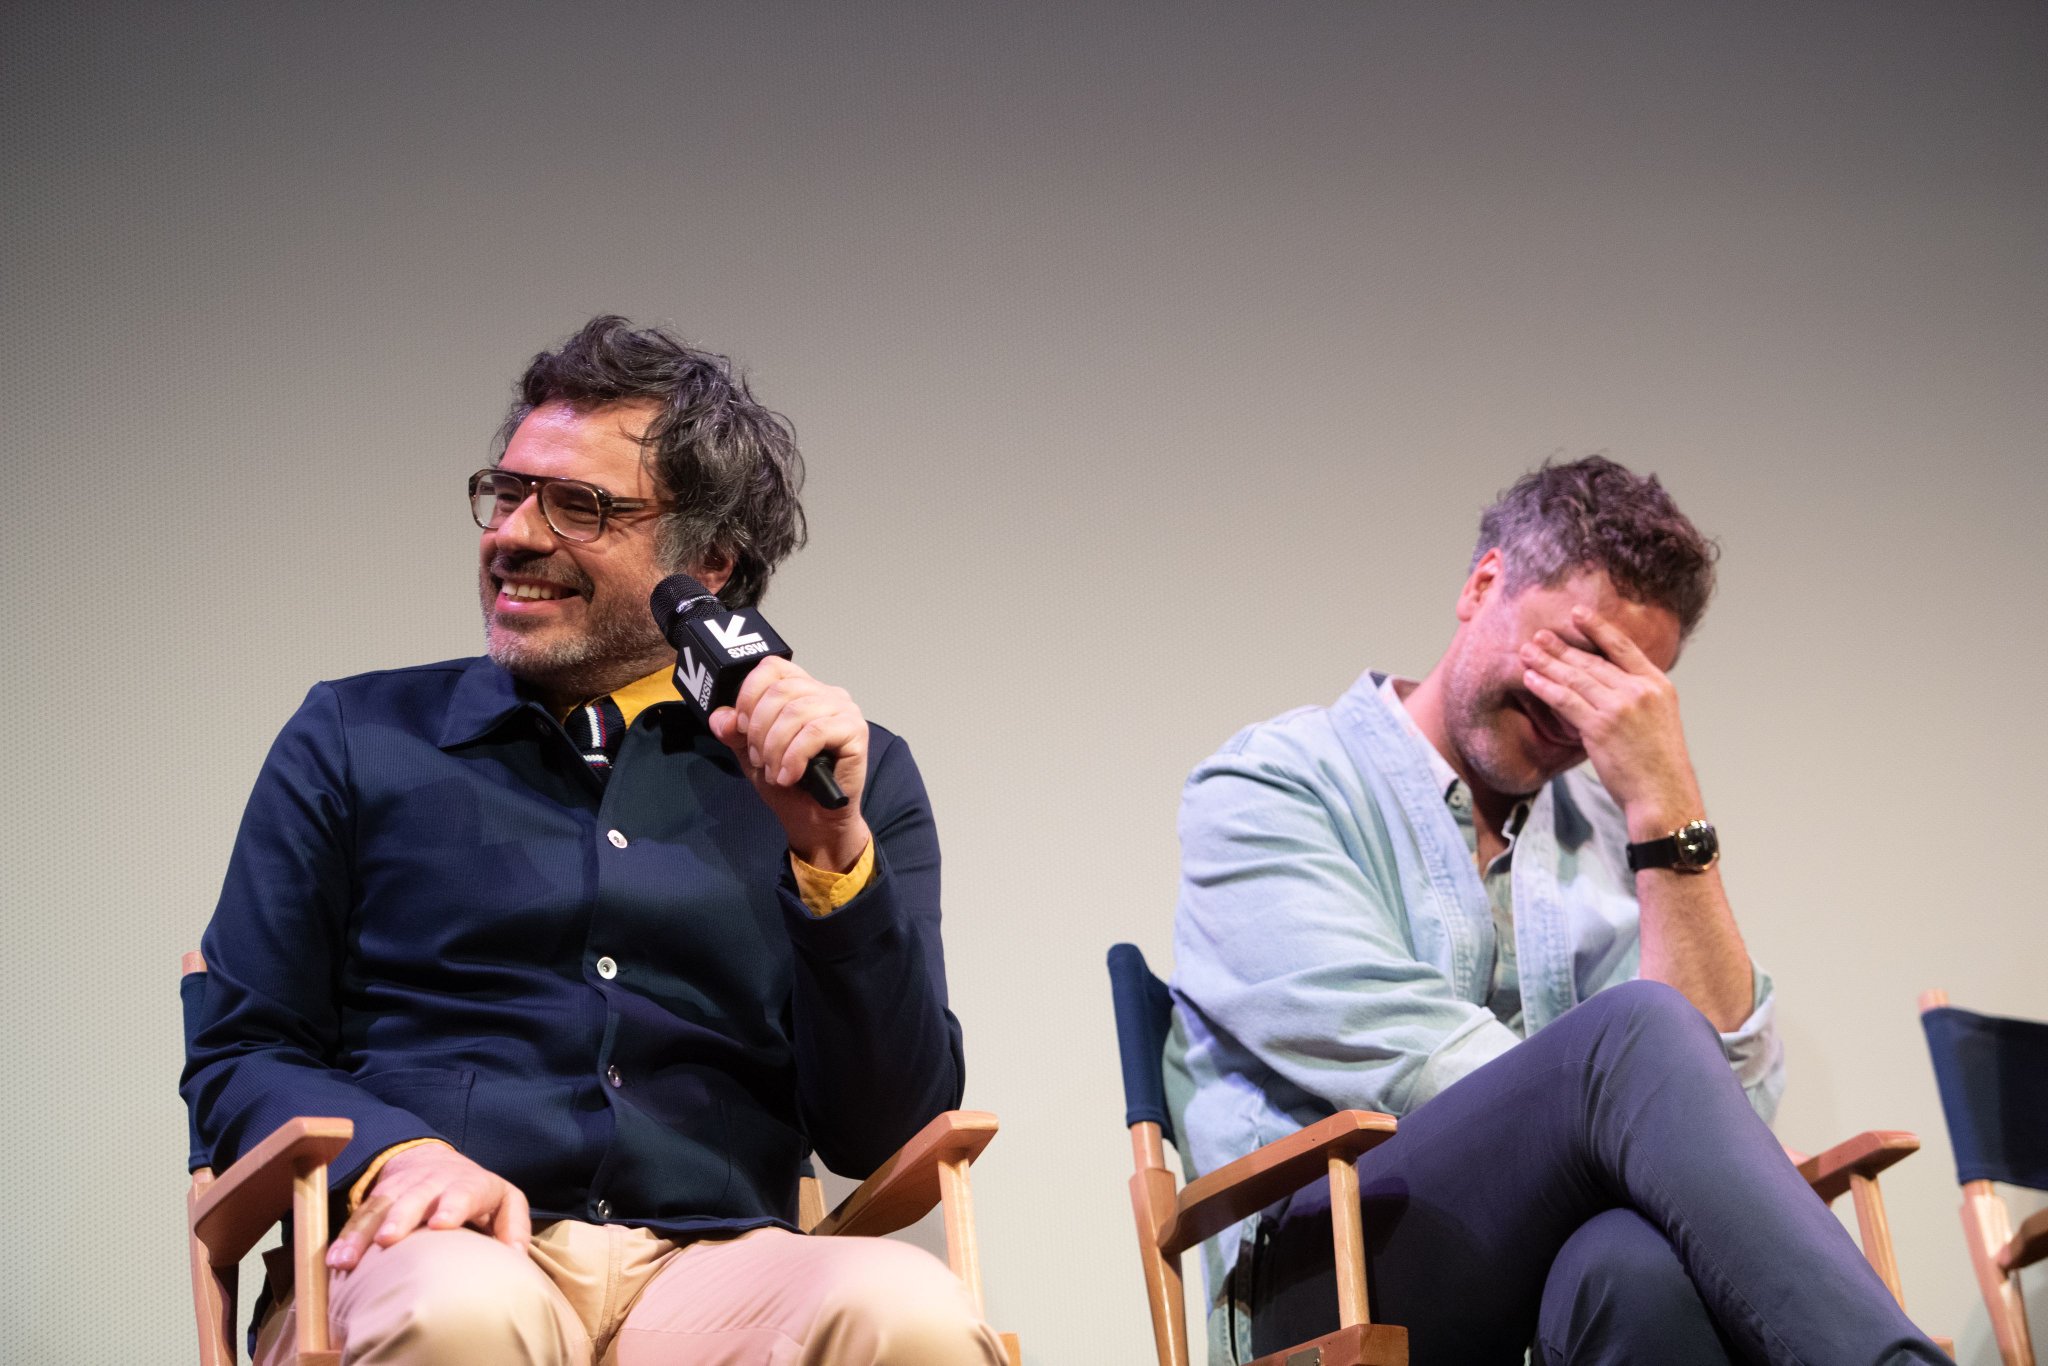  Happy birthday to Jemaine Clement, who seems to hang out with Taika Waititi often. 